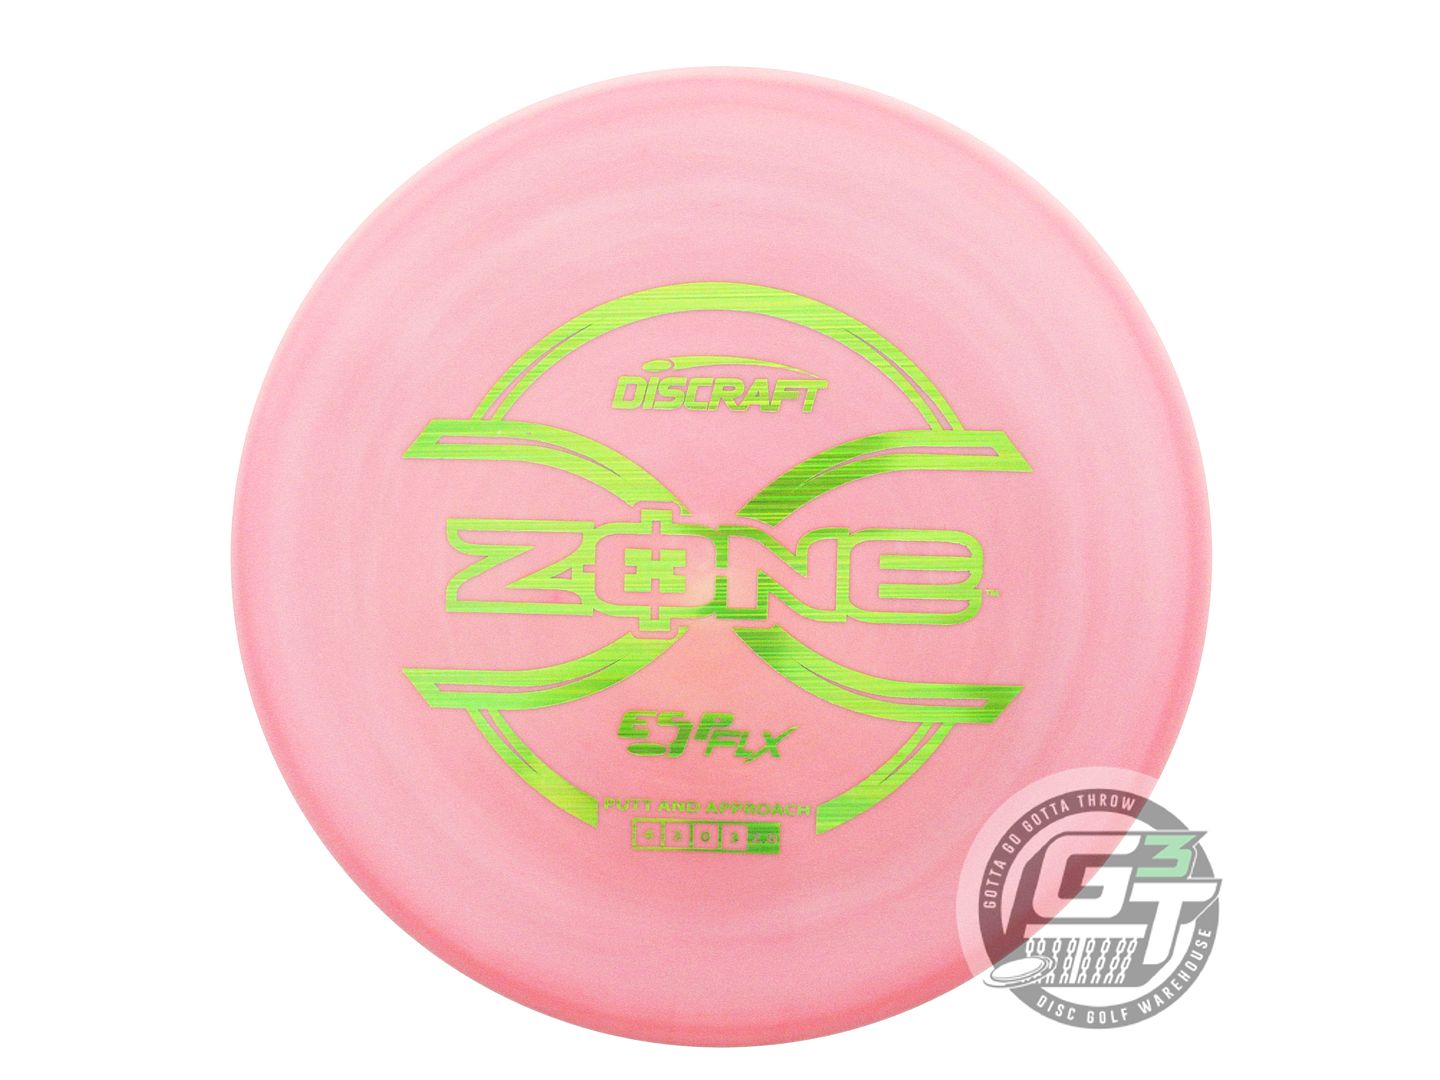 Discraft ESP FLX Zone Putter Golf Disc (Individually Listed)